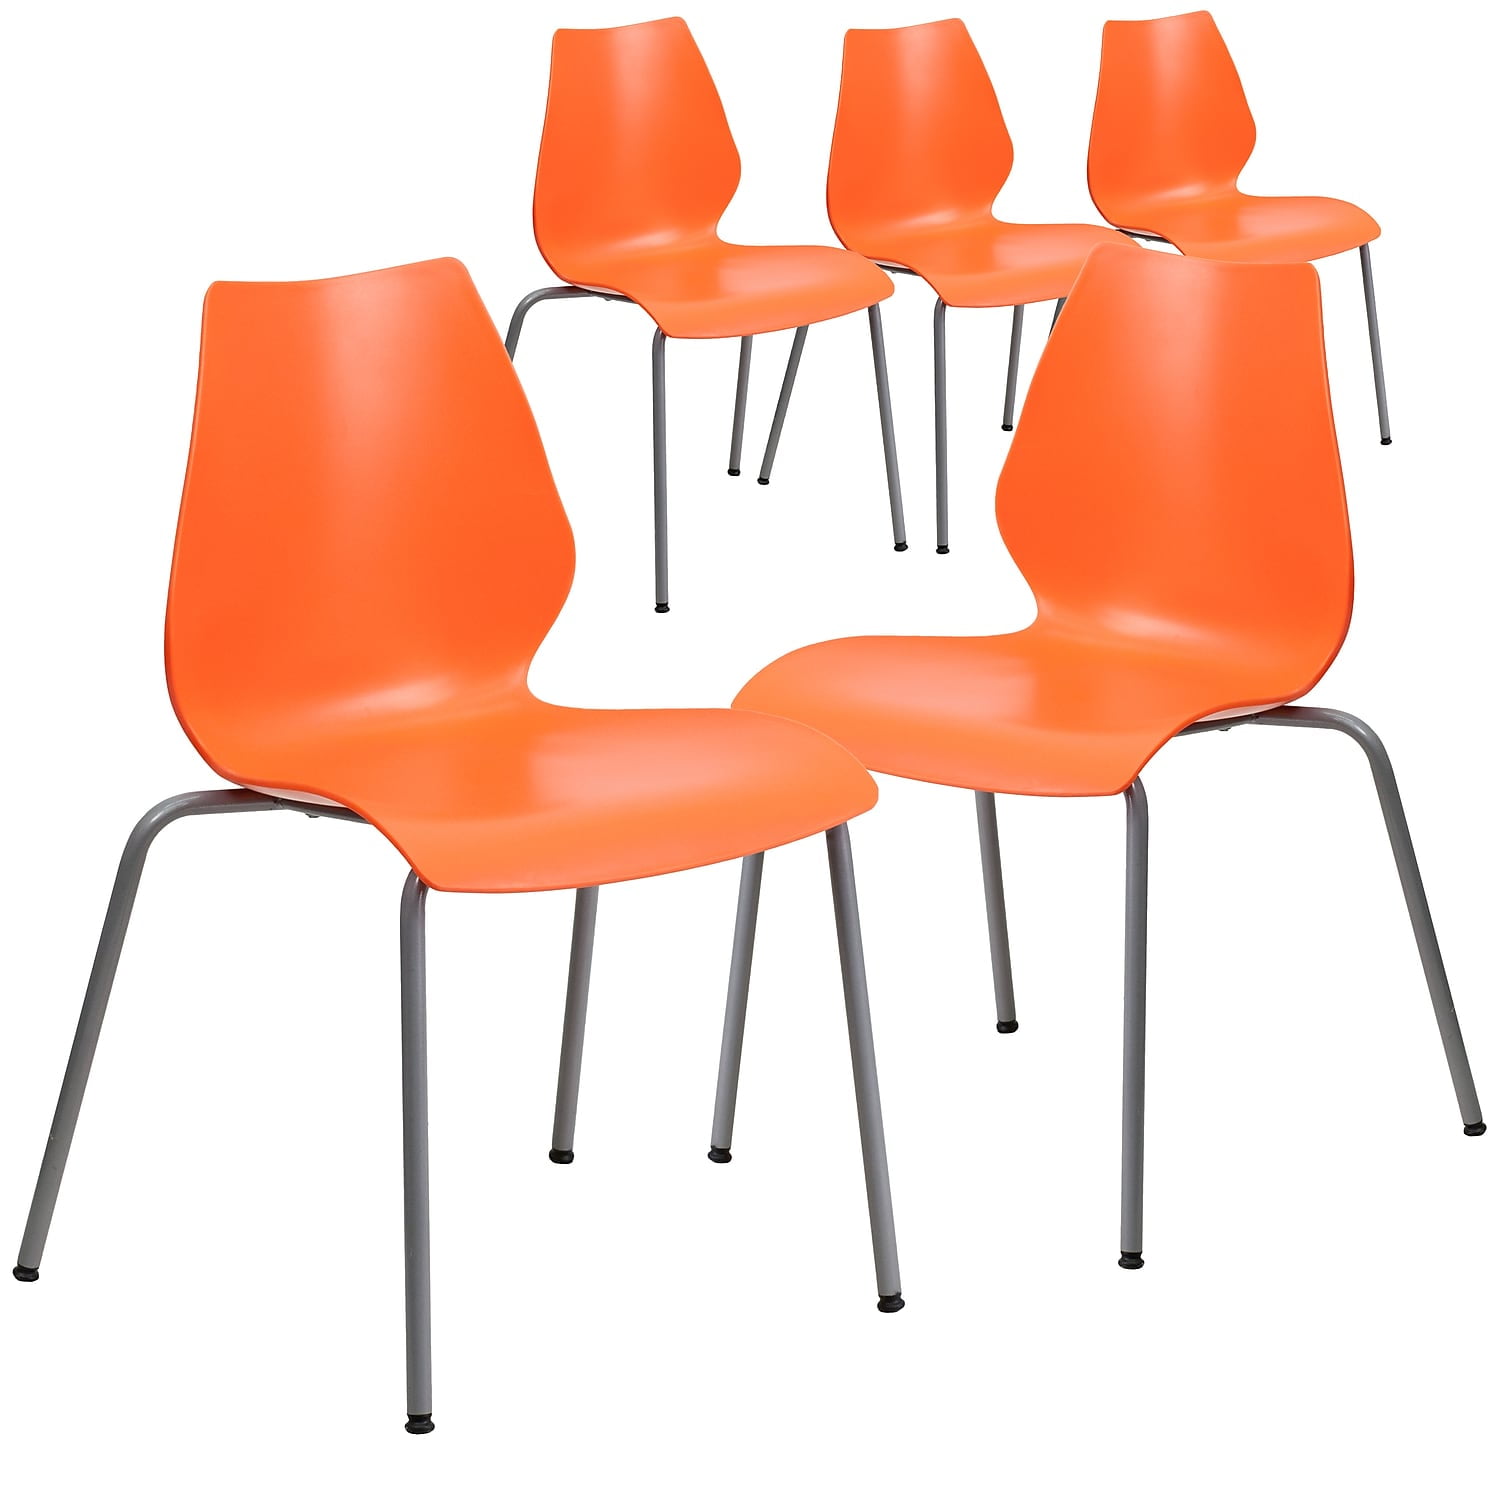 Capacity Orange Stack Chair with Lumbar Support and Silver Frame Flash Furniture HERCULES Series 770 lb 